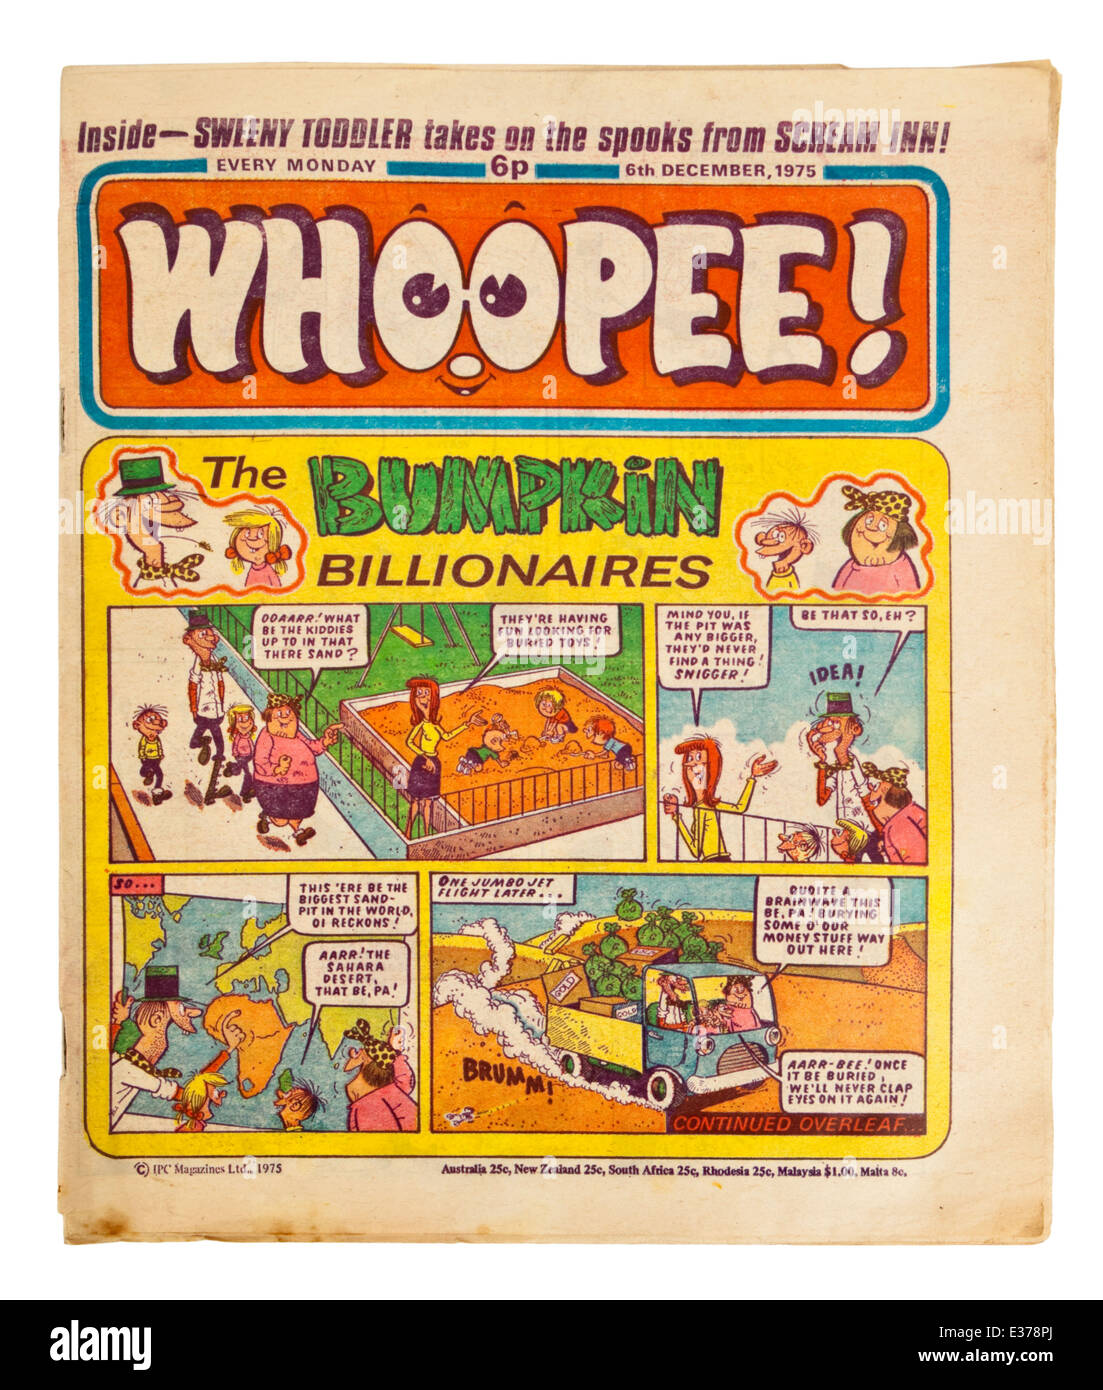 6th December 1975 copy of 'Whoopee!', the popular British weekly comic from the 1970's. Stock Photo